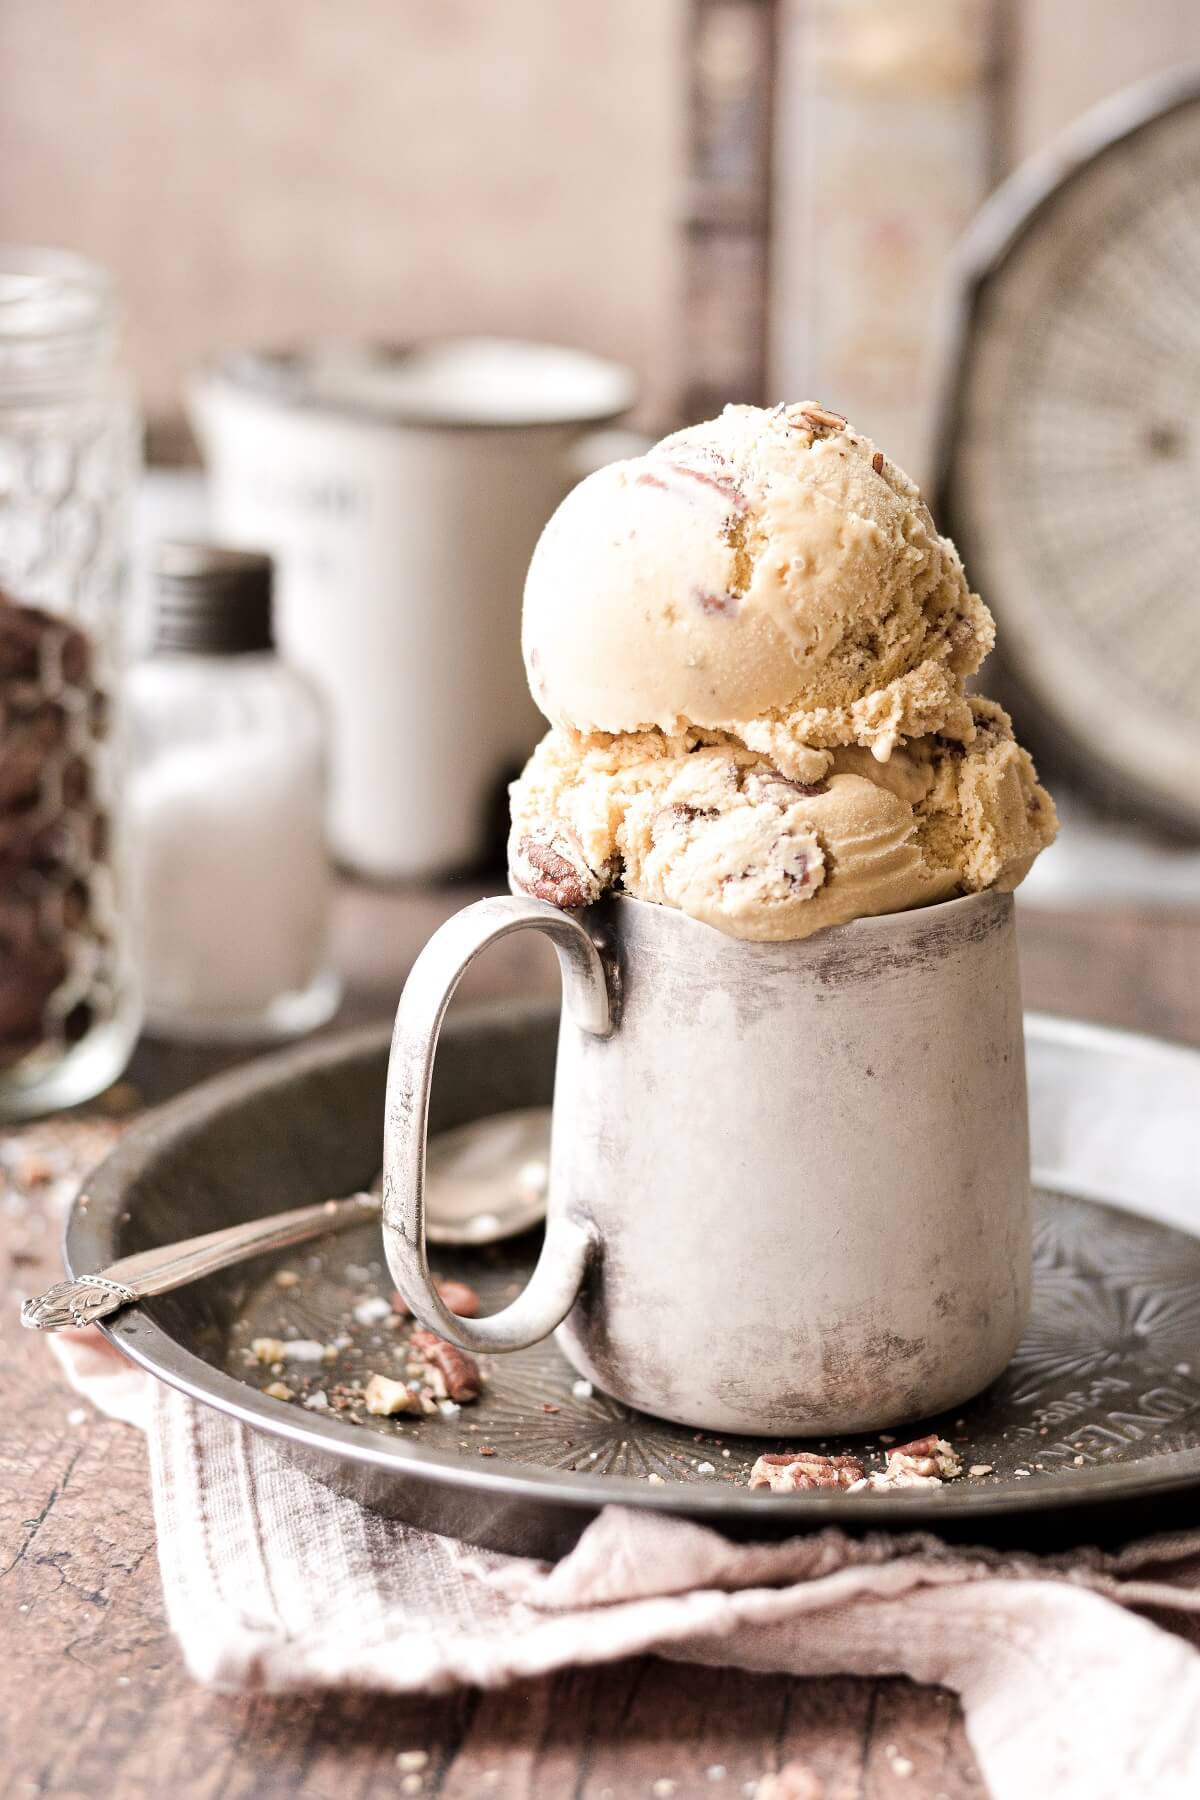 Butter pecan ice cream in a vintage silver cup.